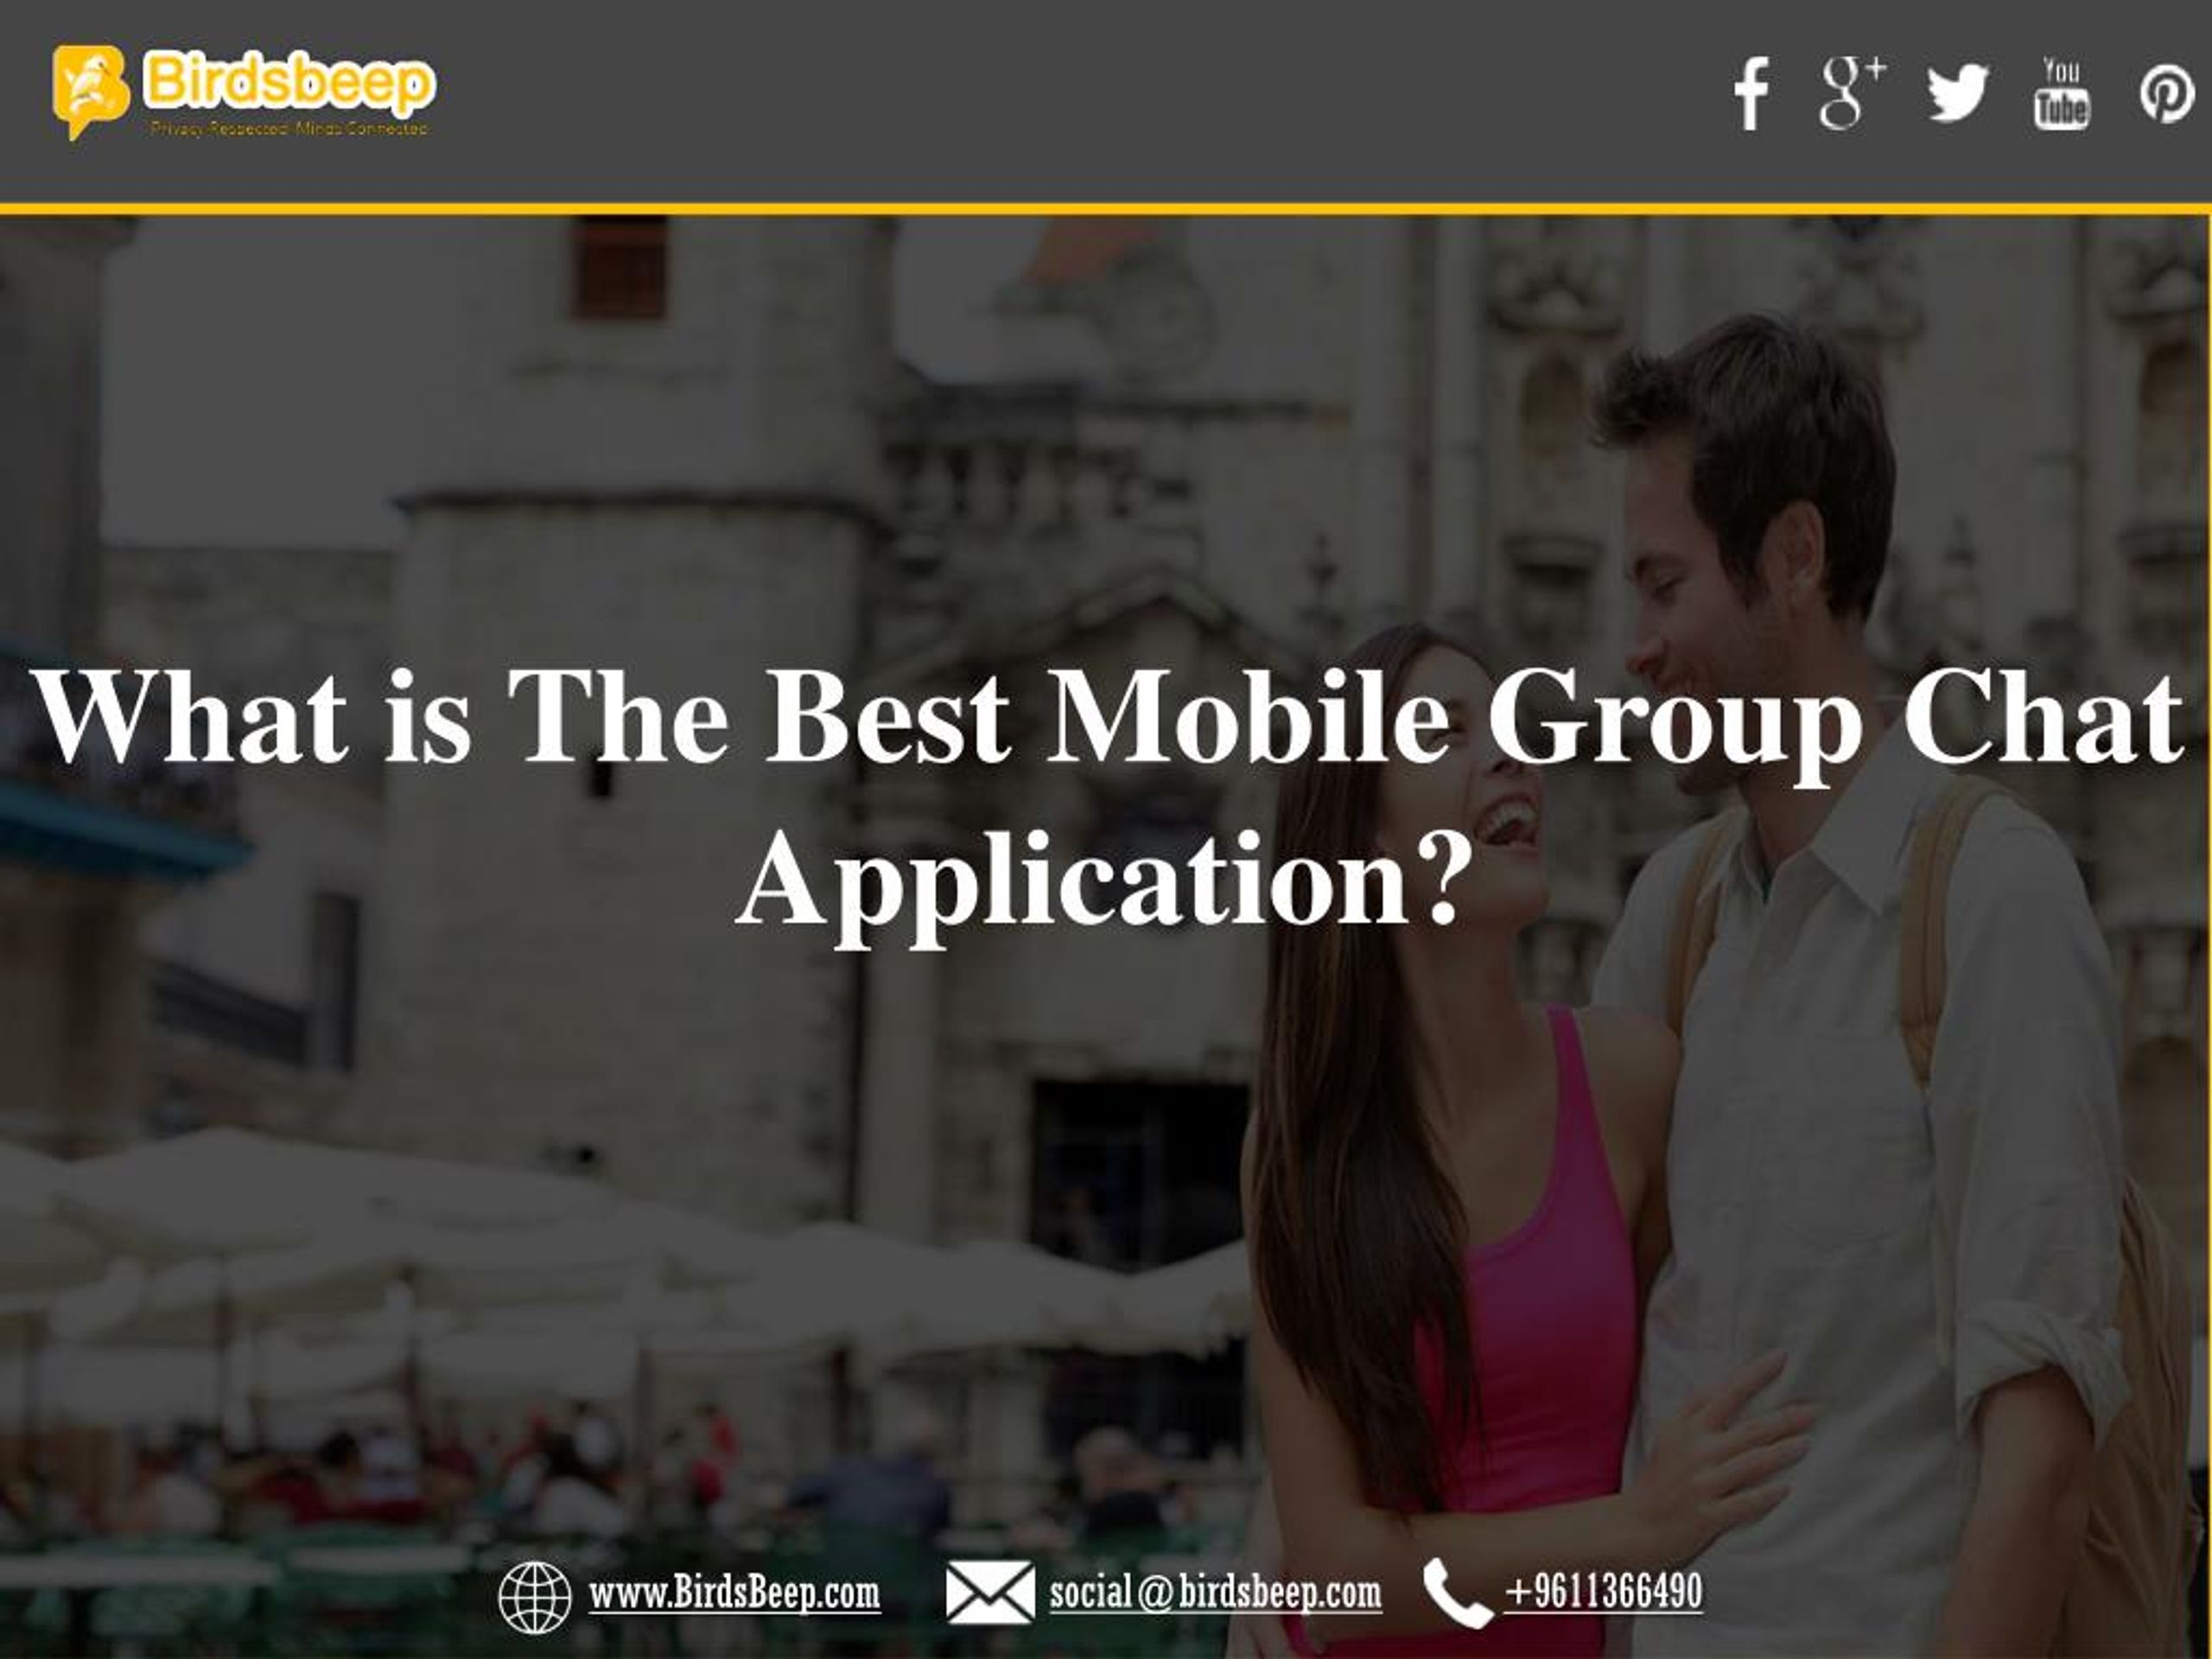 Ppt What Is The Best Mobile Group Chat Application Powerpoint Presentation Id 7592872